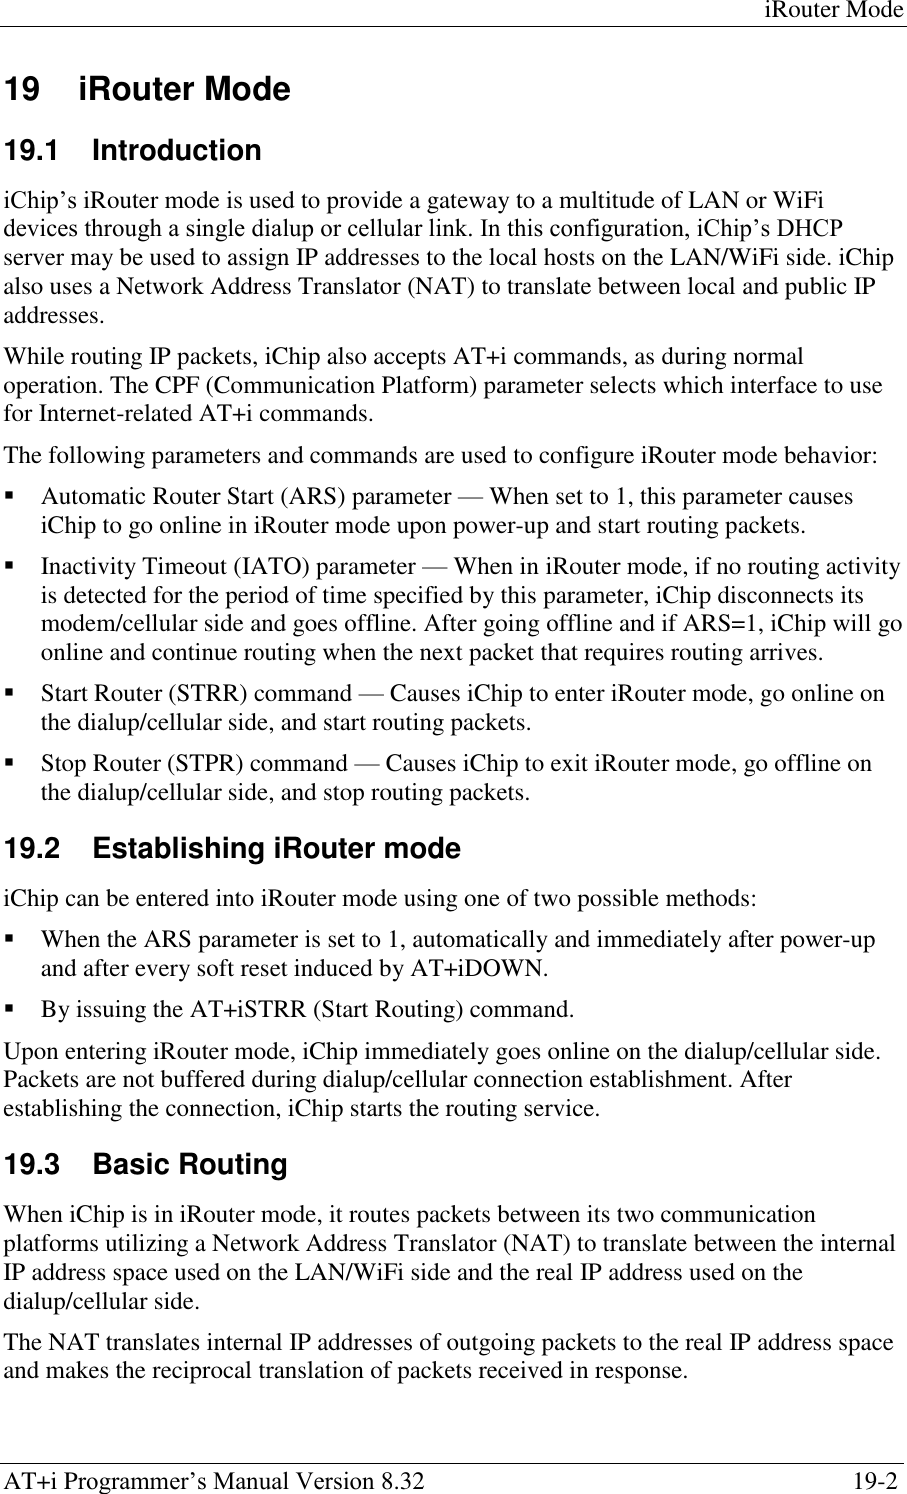 iRouter Mode AT+i Programmer‘s Manual Version 8.32  19-2 19  iRouter Mode 19.1  Introduction iChip‘s iRouter mode is used to provide a gateway to a multitude of LAN or WiFi devices through a single dialup or cellular link. In this configuration, iChip‘s DHCP server may be used to assign IP addresses to the local hosts on the LAN/WiFi side. iChip also uses a Network Address Translator (NAT) to translate between local and public IP addresses. While routing IP packets, iChip also accepts AT+i commands, as during normal operation. The CPF (Communication Platform) parameter selects which interface to use for Internet-related AT+i commands. The following parameters and commands are used to configure iRouter mode behavior:  Automatic Router Start (ARS) parameter — When set to 1, this parameter causes iChip to go online in iRouter mode upon power-up and start routing packets.  Inactivity Timeout (IATO) parameter — When in iRouter mode, if no routing activity is detected for the period of time specified by this parameter, iChip disconnects its modem/cellular side and goes offline. After going offline and if ARS=1, iChip will go online and continue routing when the next packet that requires routing arrives.  Start Router (STRR) command — Causes iChip to enter iRouter mode, go online on the dialup/cellular side, and start routing packets.  Stop Router (STPR) command — Causes iChip to exit iRouter mode, go offline on the dialup/cellular side, and stop routing packets. 19.2  Establishing iRouter mode iChip can be entered into iRouter mode using one of two possible methods:  When the ARS parameter is set to 1, automatically and immediately after power-up and after every soft reset induced by AT+iDOWN.  By issuing the AT+iSTRR (Start Routing) command. Upon entering iRouter mode, iChip immediately goes online on the dialup/cellular side. Packets are not buffered during dialup/cellular connection establishment. After establishing the connection, iChip starts the routing service. 19.3  Basic Routing When iChip is in iRouter mode, it routes packets between its two communication platforms utilizing a Network Address Translator (NAT) to translate between the internal IP address space used on the LAN/WiFi side and the real IP address used on the dialup/cellular side. The NAT translates internal IP addresses of outgoing packets to the real IP address space and makes the reciprocal translation of packets received in response. 